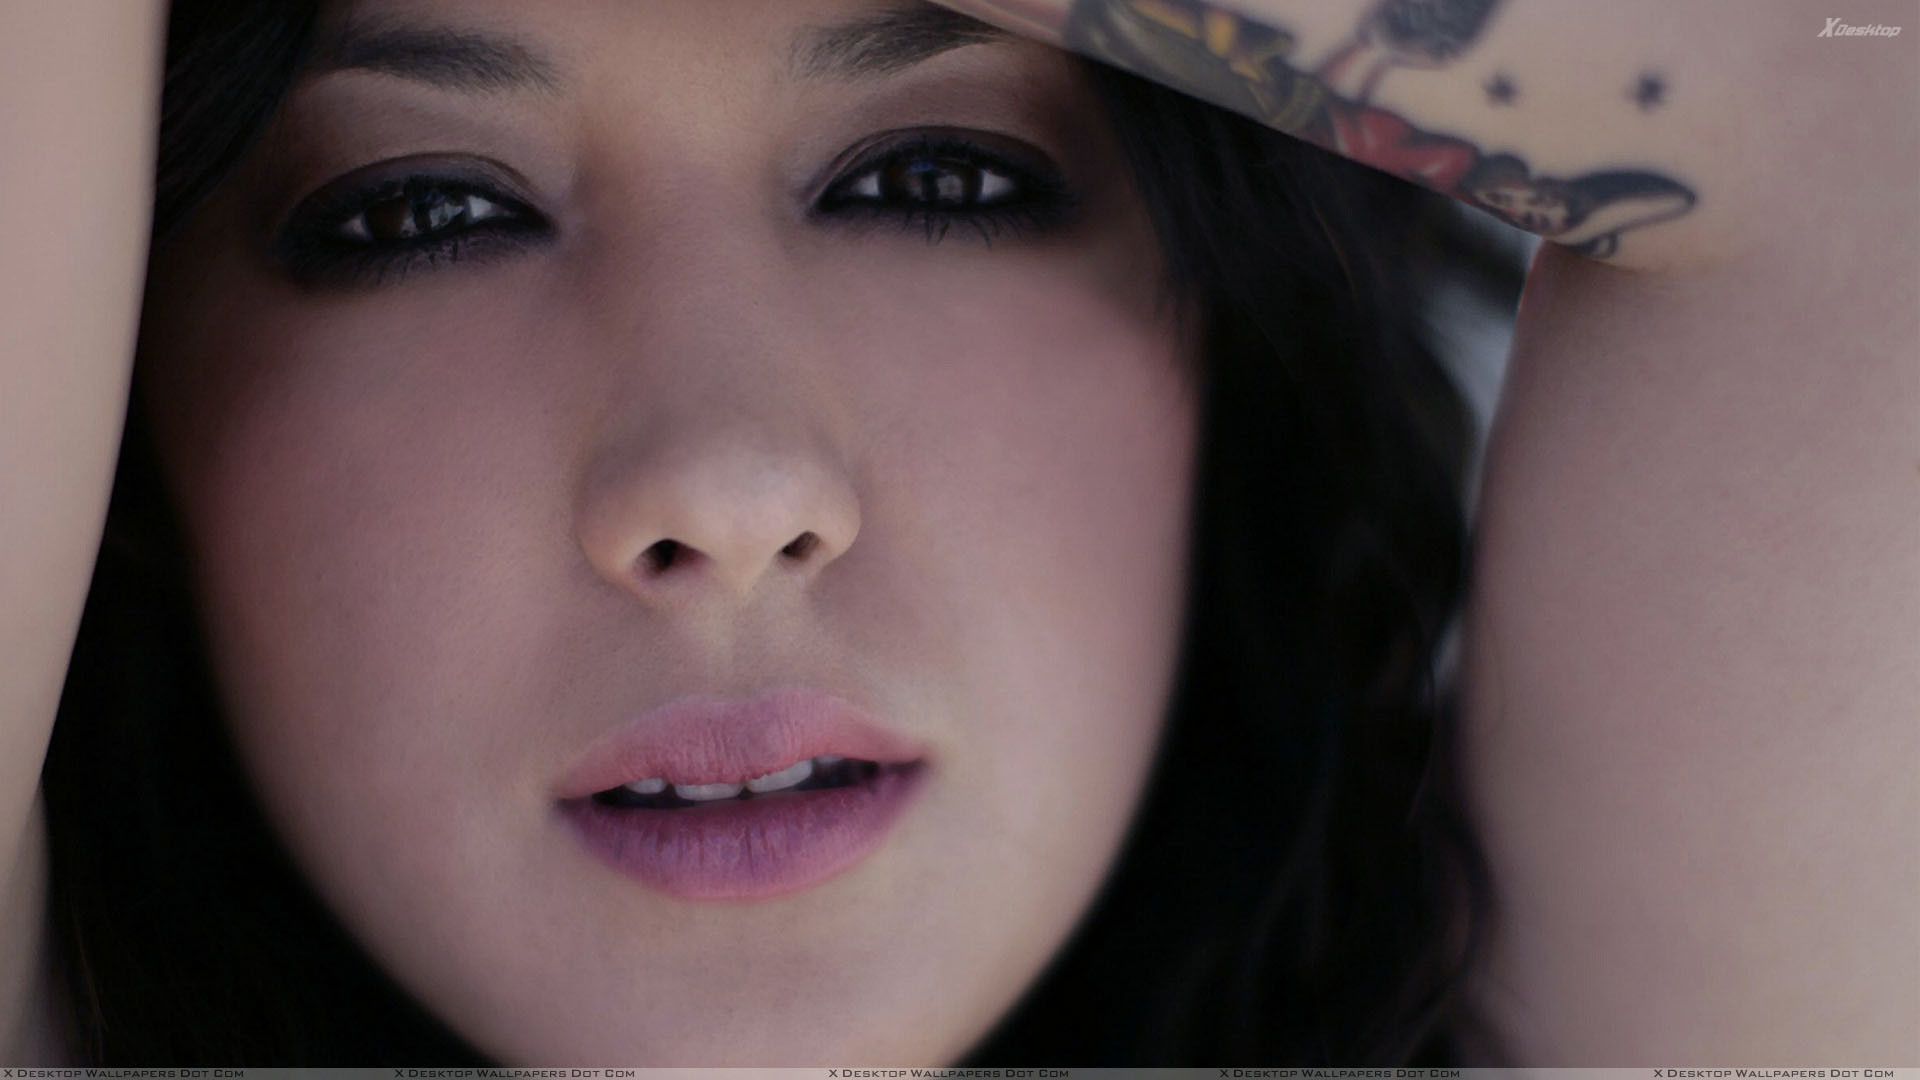 1920x1080 You are viewing wallpaper titled "Michelle Branch ...